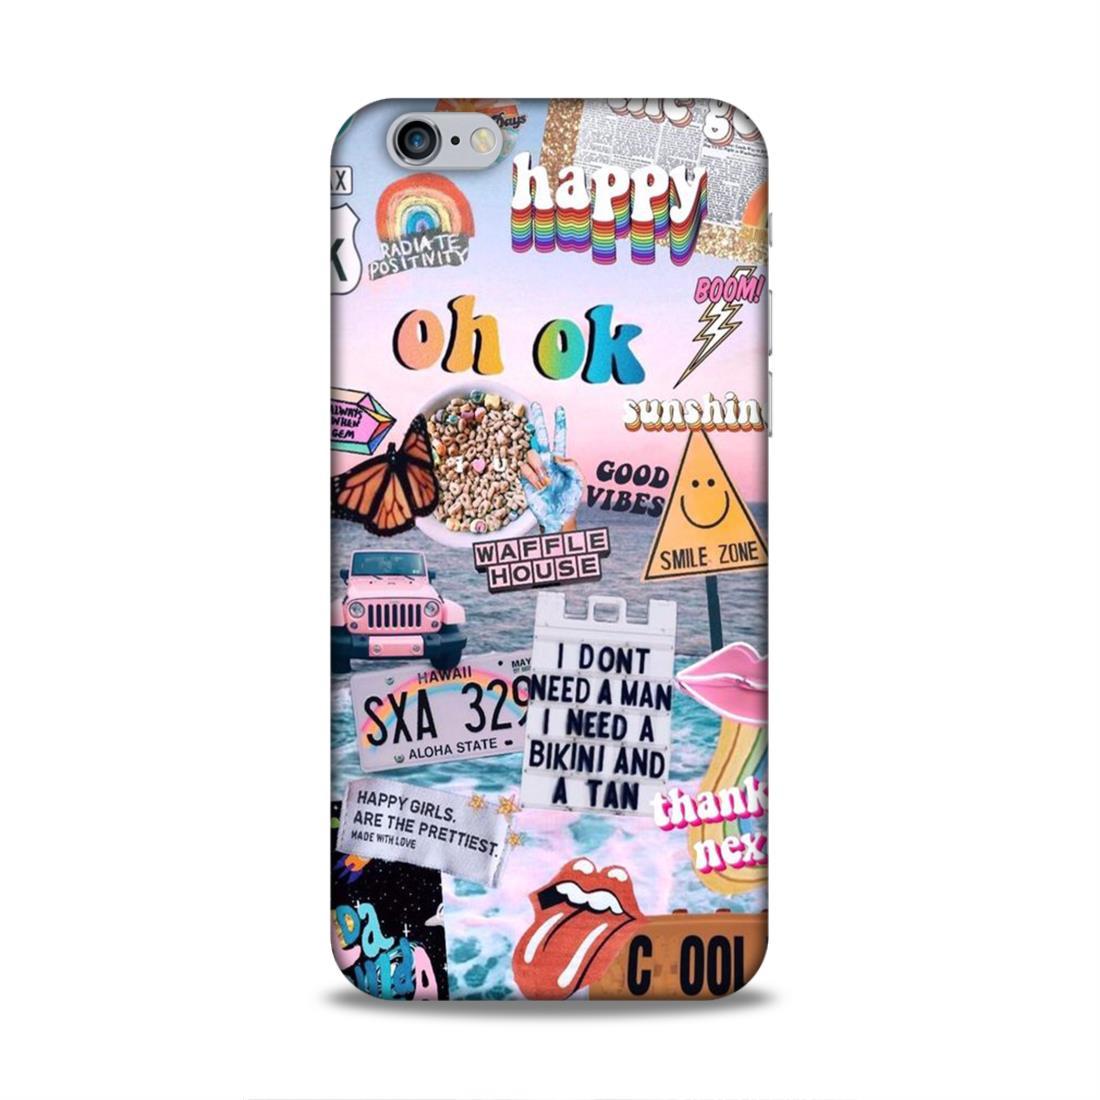 Oh Ok Happy iPhone 6 Phone Case Cover